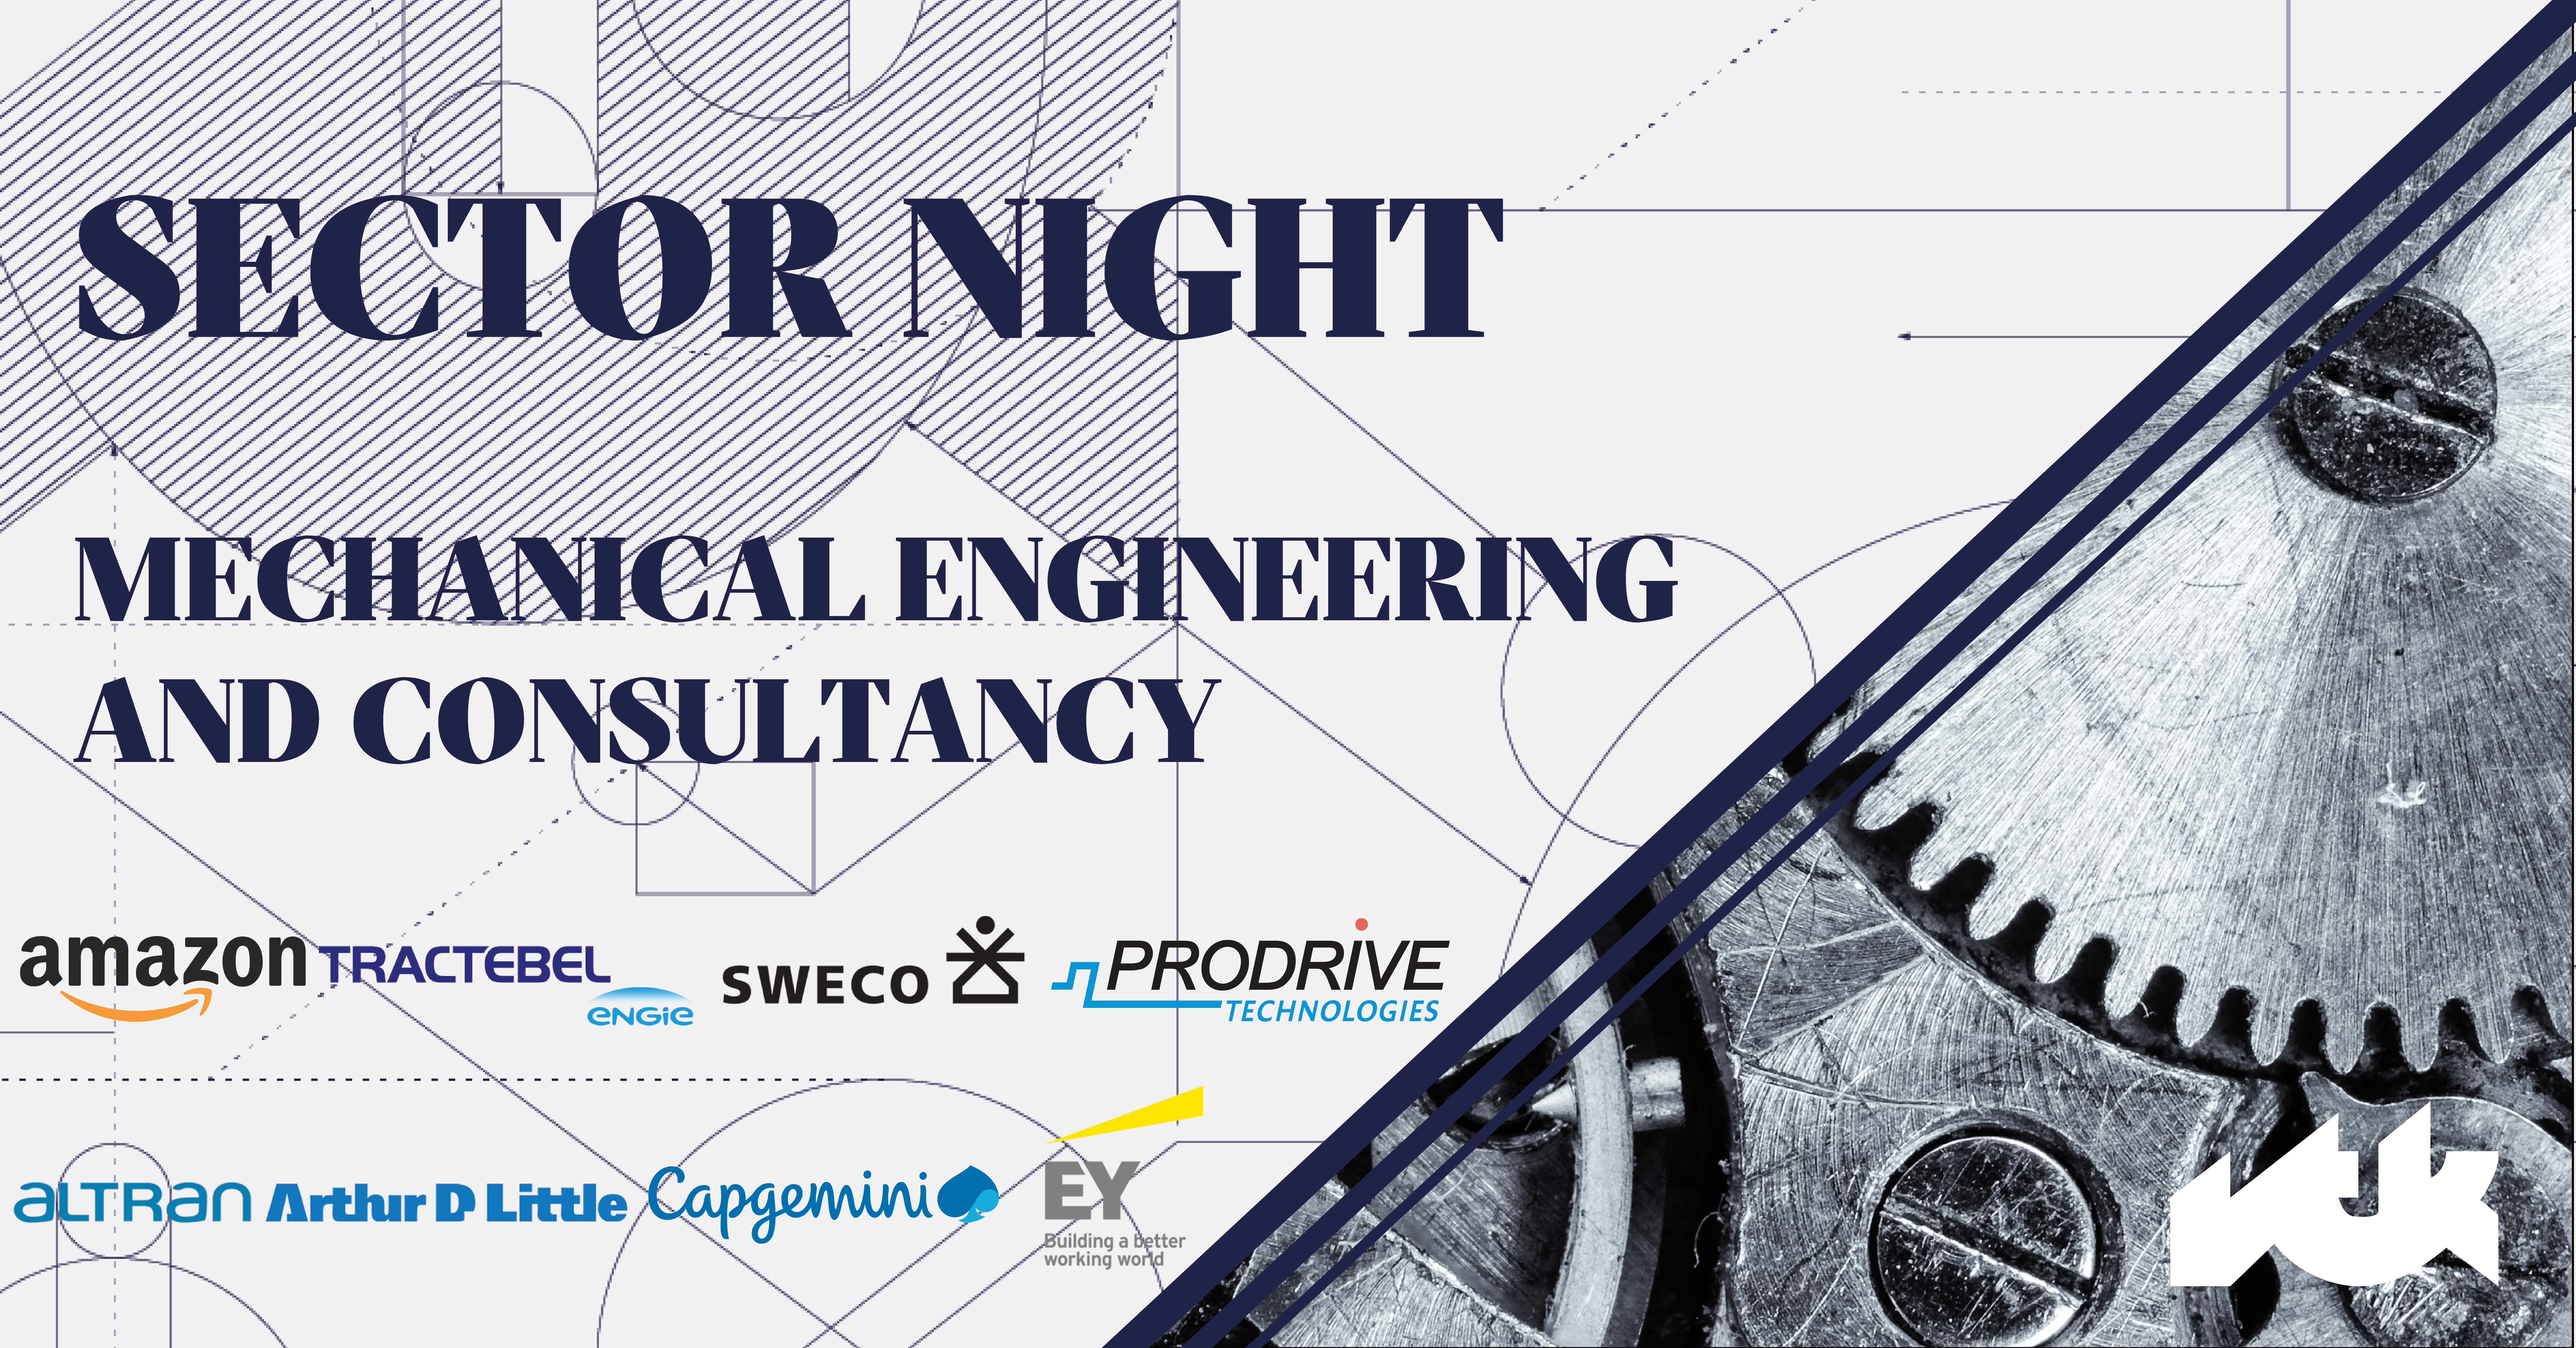 Sector Night Mechanical Engineering & Consultancy